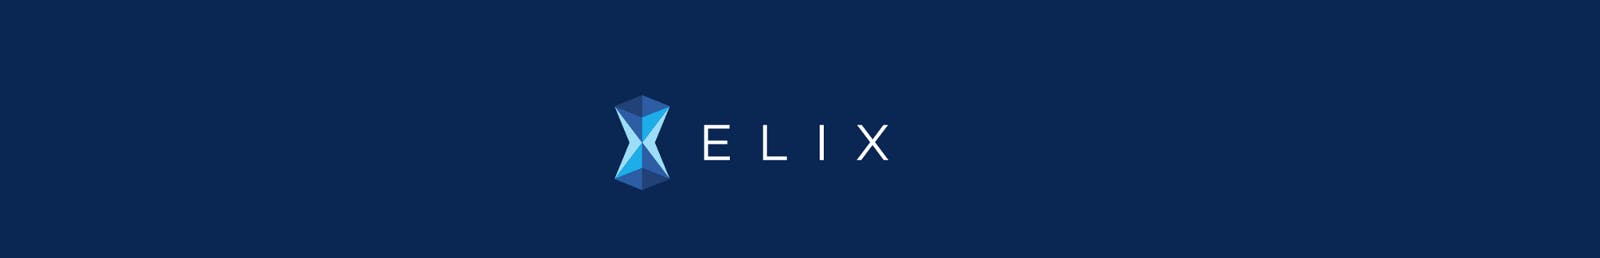 /were-using-touch-id-to-increase-security-in-the-elix-app-our-new-activity-feed-and-ledger-b8ba3a2042d2 feature image